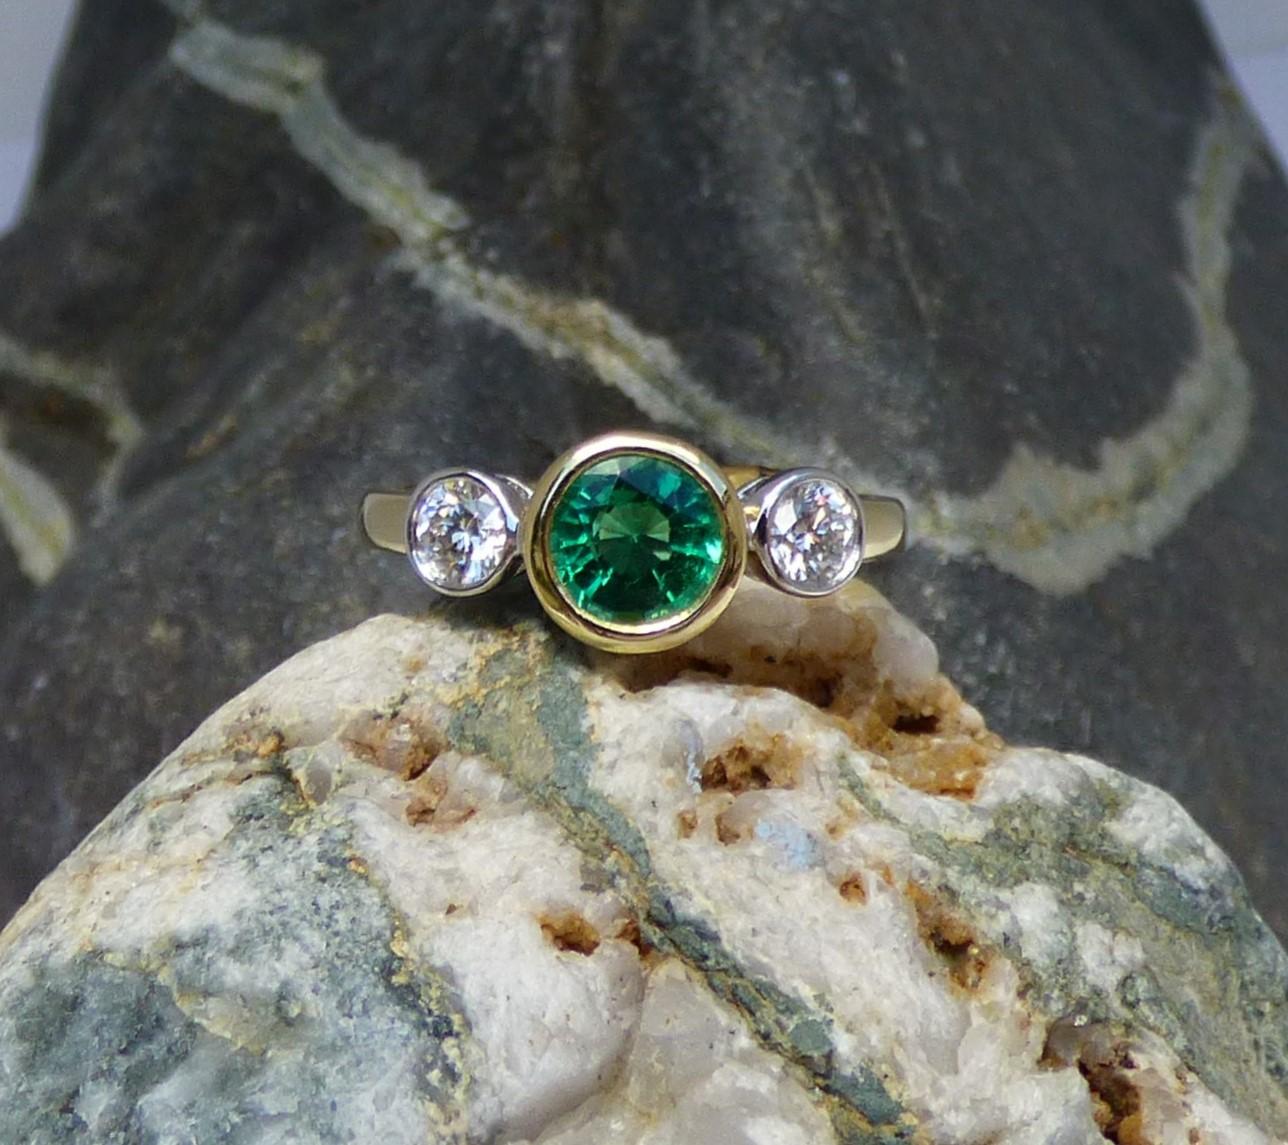 An exceptionally bright and colourful Emerald is set between two Diamonds. The Emerald is 7mm round and .85ct. in weight. The two Diamonds have a total Diamond weight of .43ct.  The stones are bezel set in a handmade 18K yellow ring with the